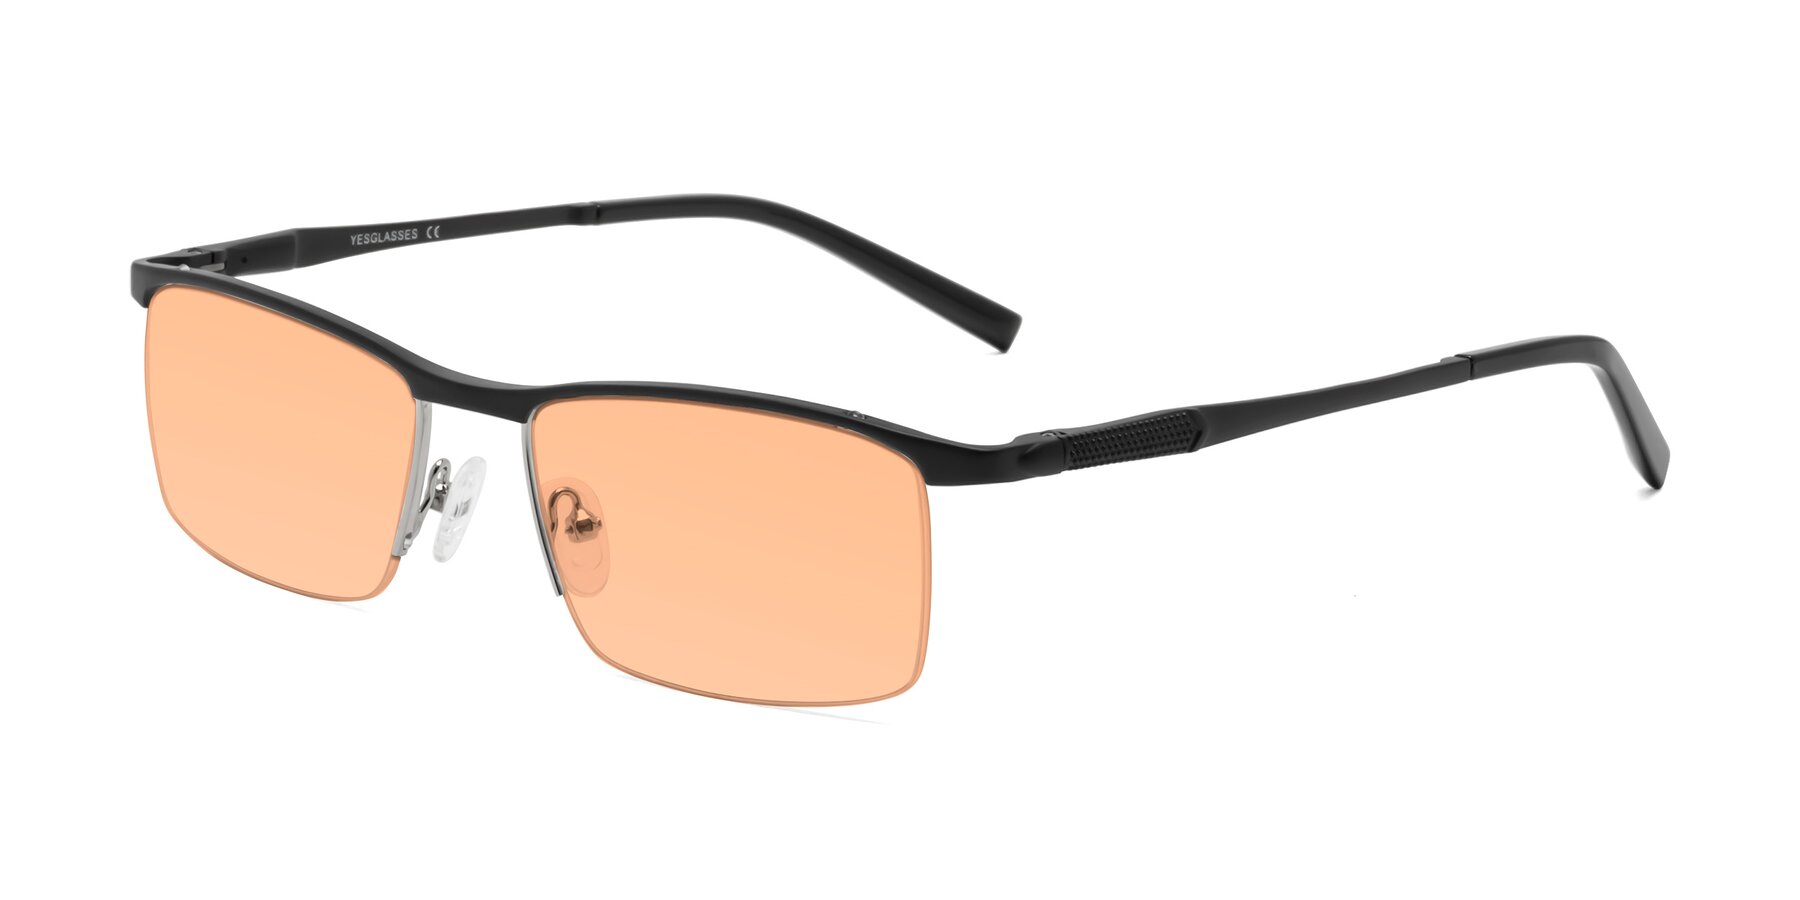 Angle of CX6303 in Black with Light Orange Tinted Lenses